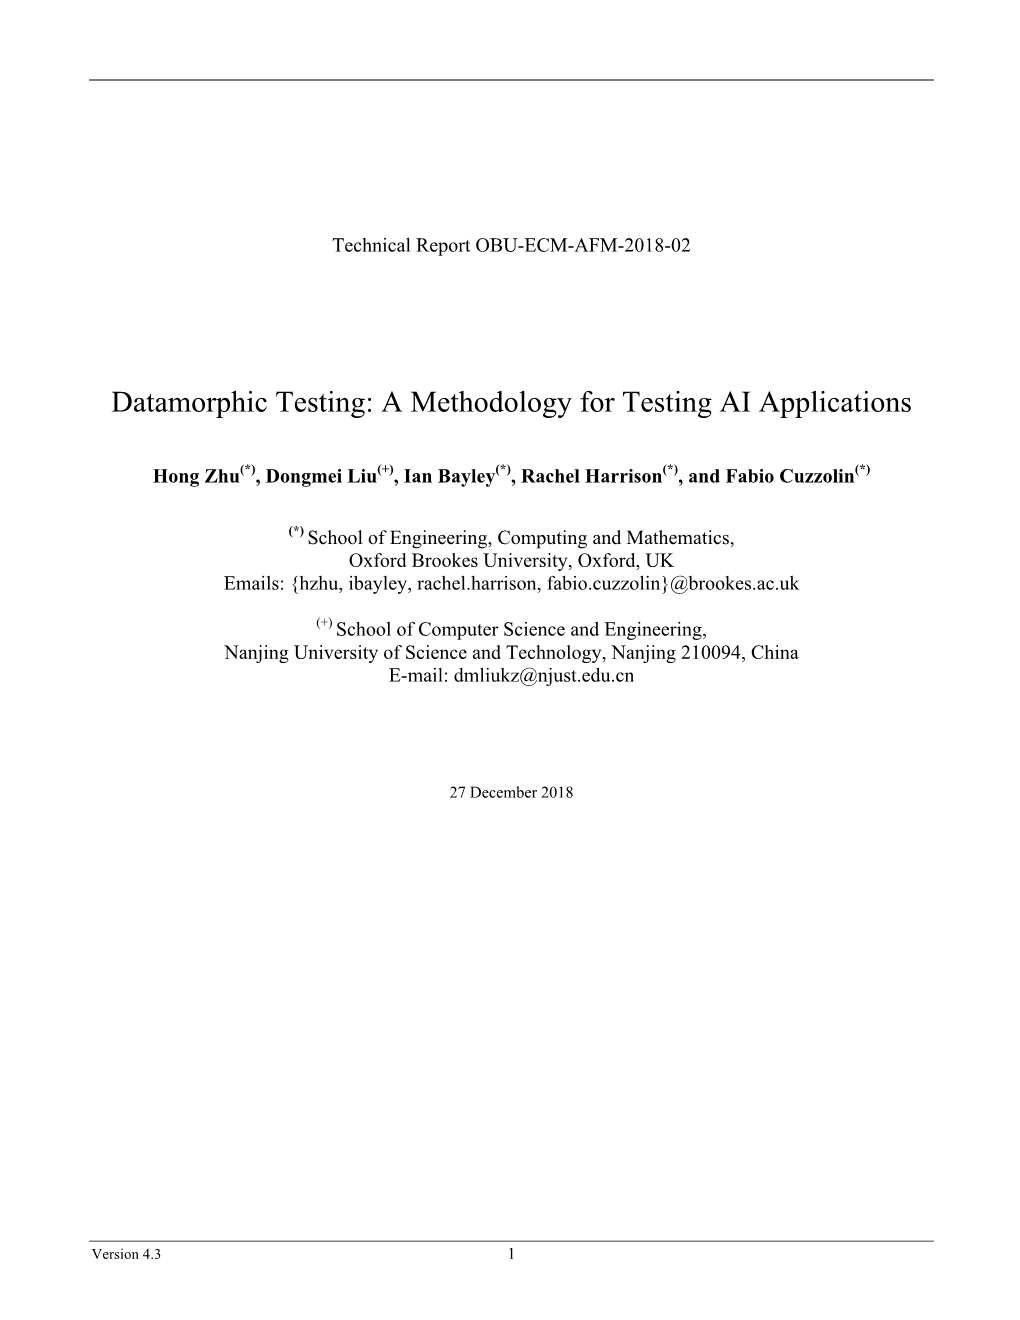 Datamorphic Testing: a Methodology for Testing AI Applications